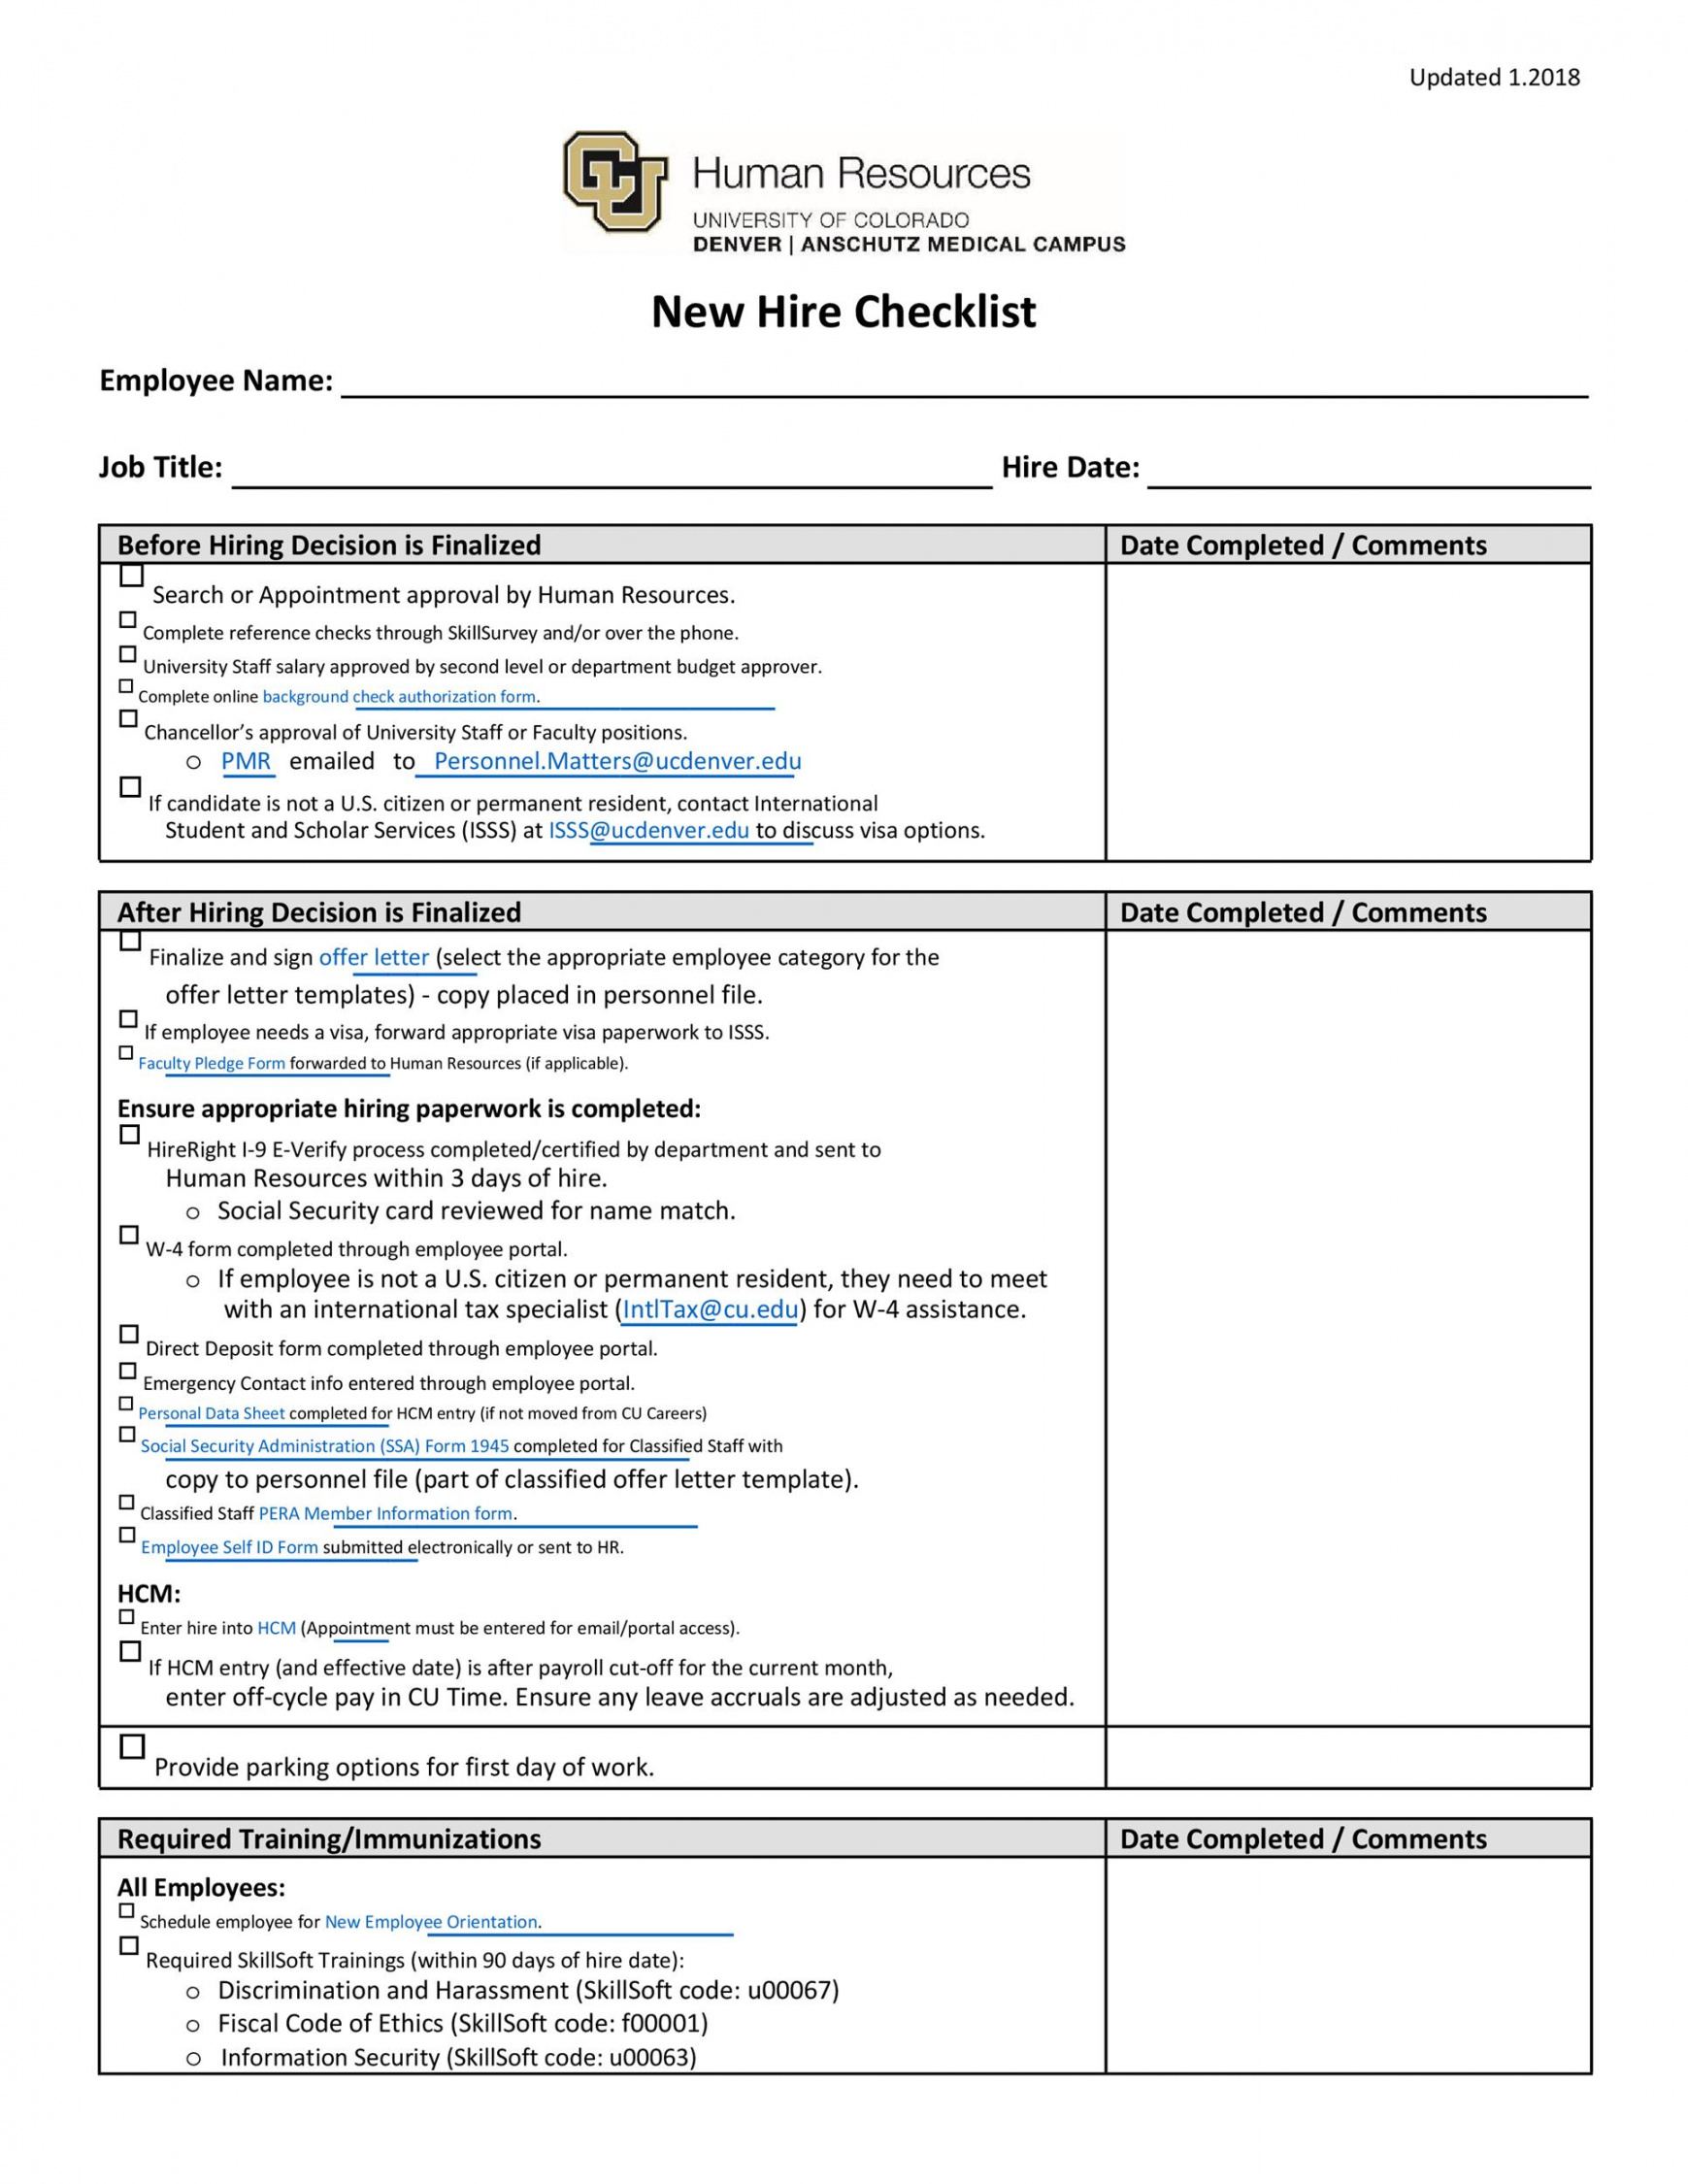 printable 50 useful new hire checklist templates &amp; forms ᐅ templatelab new employee orientation agenda template excel